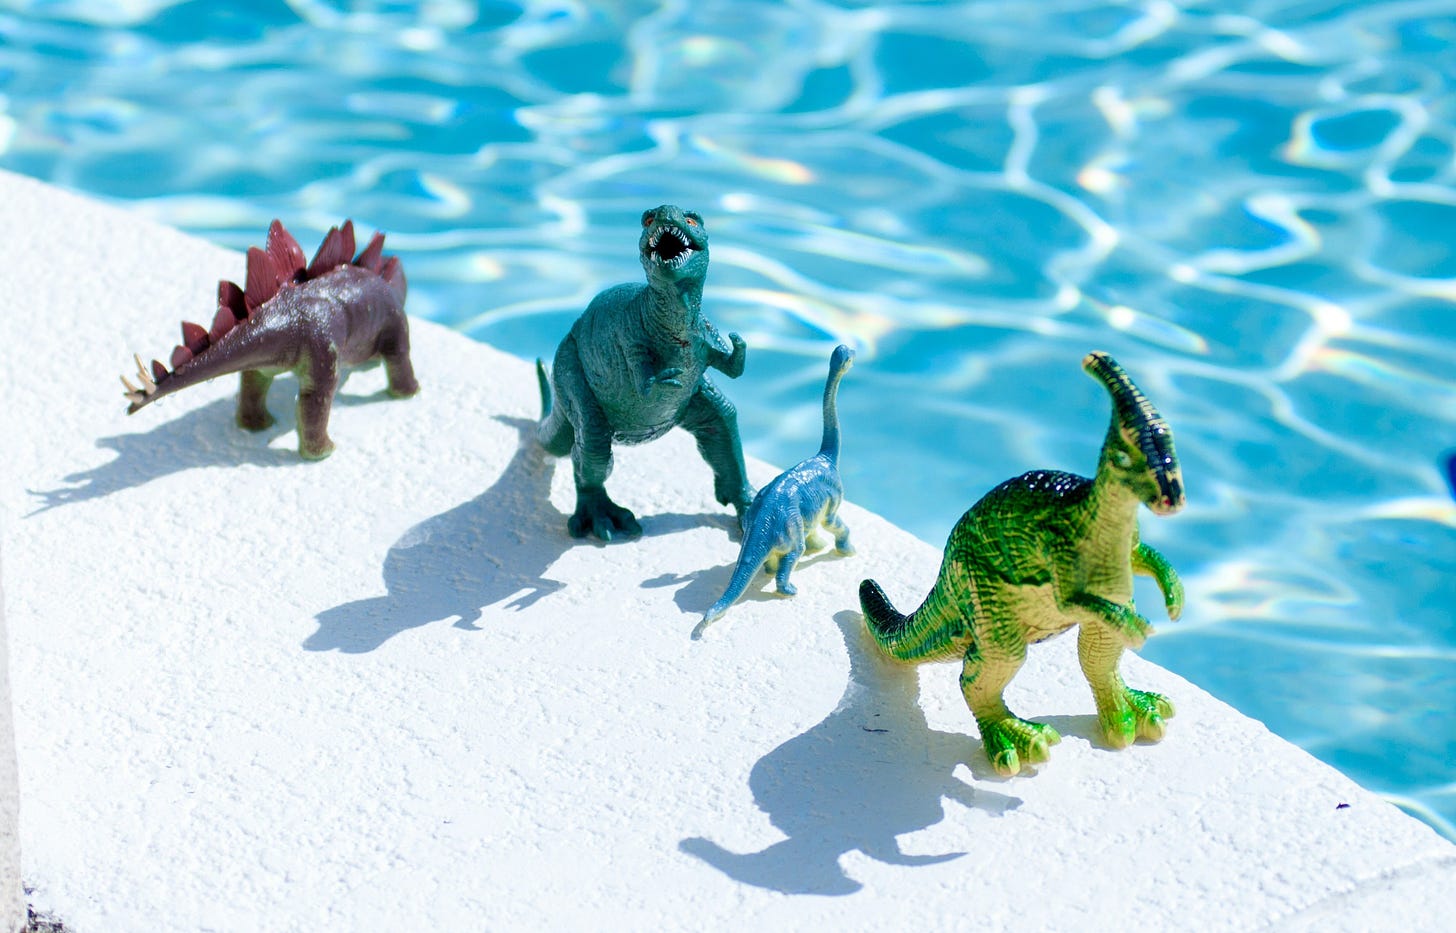 Four plastic dinosaur figurines set up along the edge of a brilliantly blue swimming pool on a sunny day.